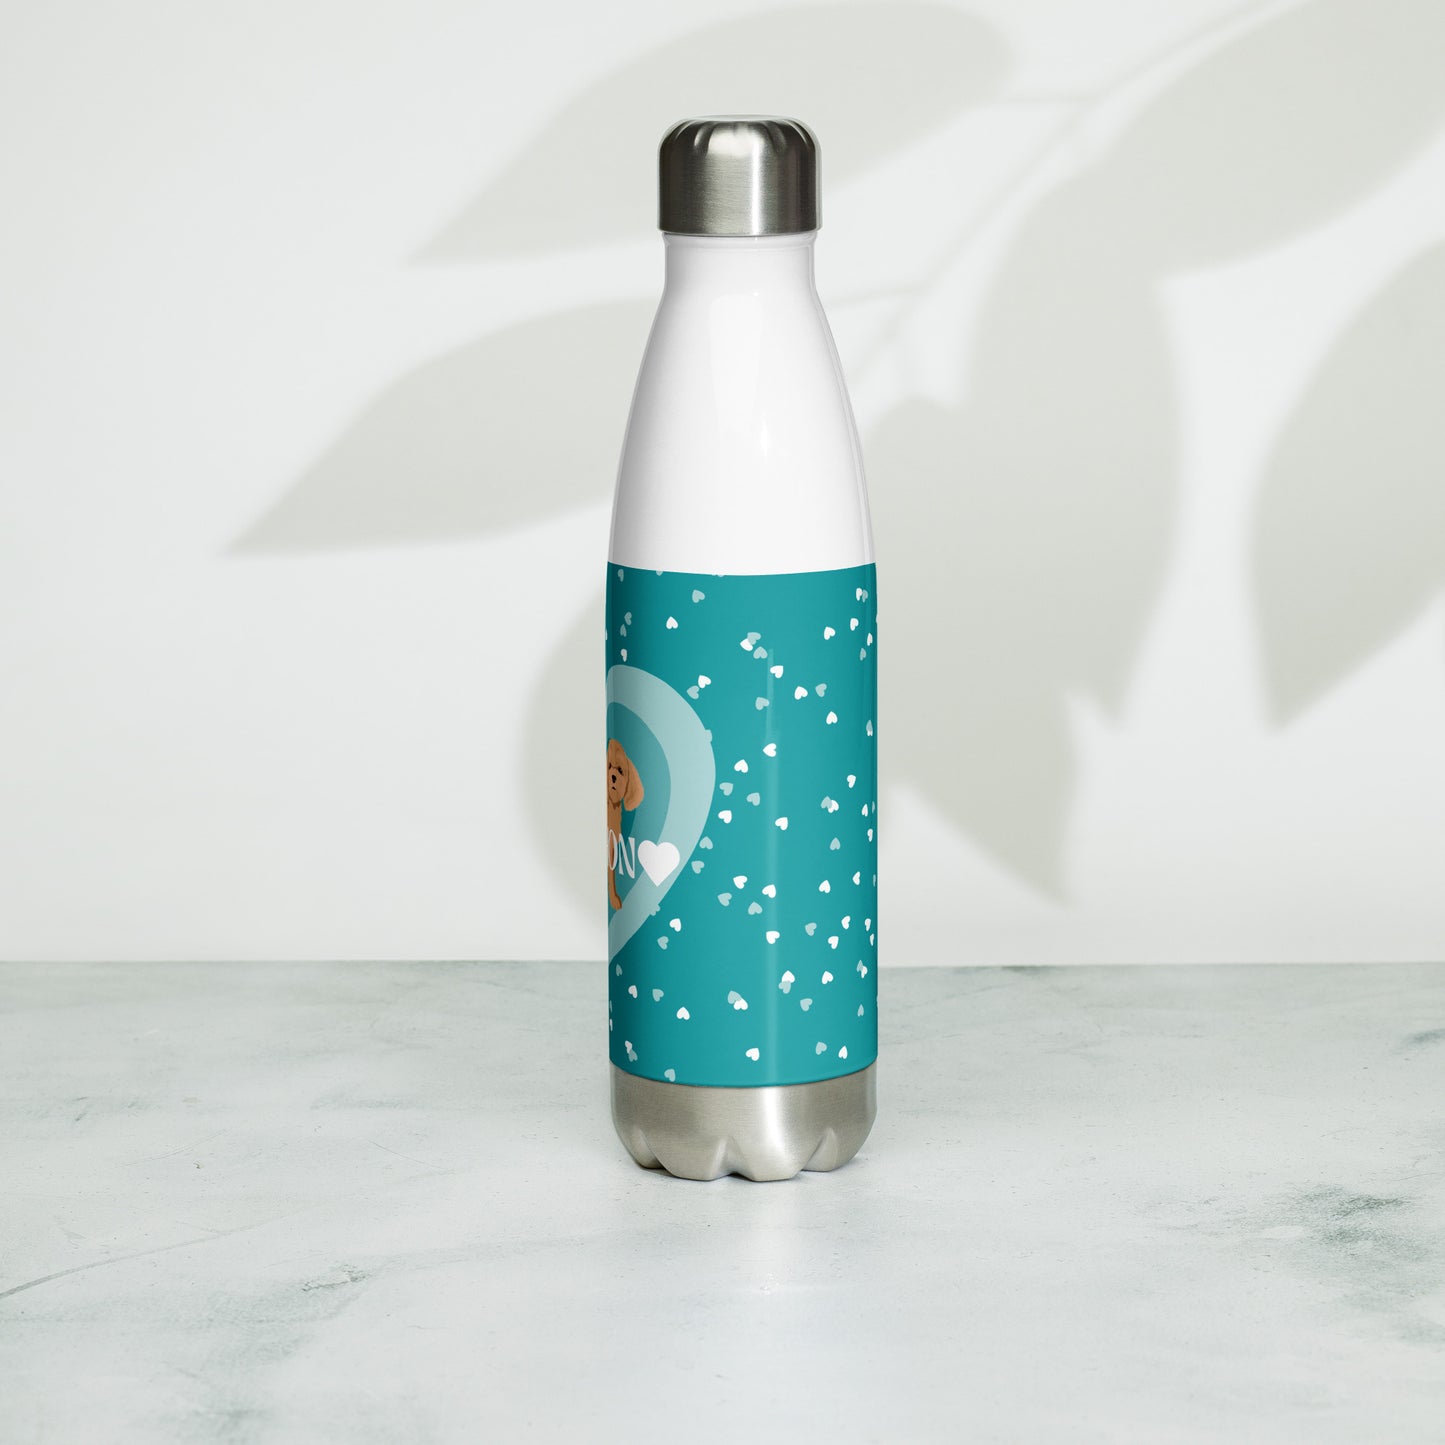 "Love" Stainless steel water bottle in teal - apricot Poochon